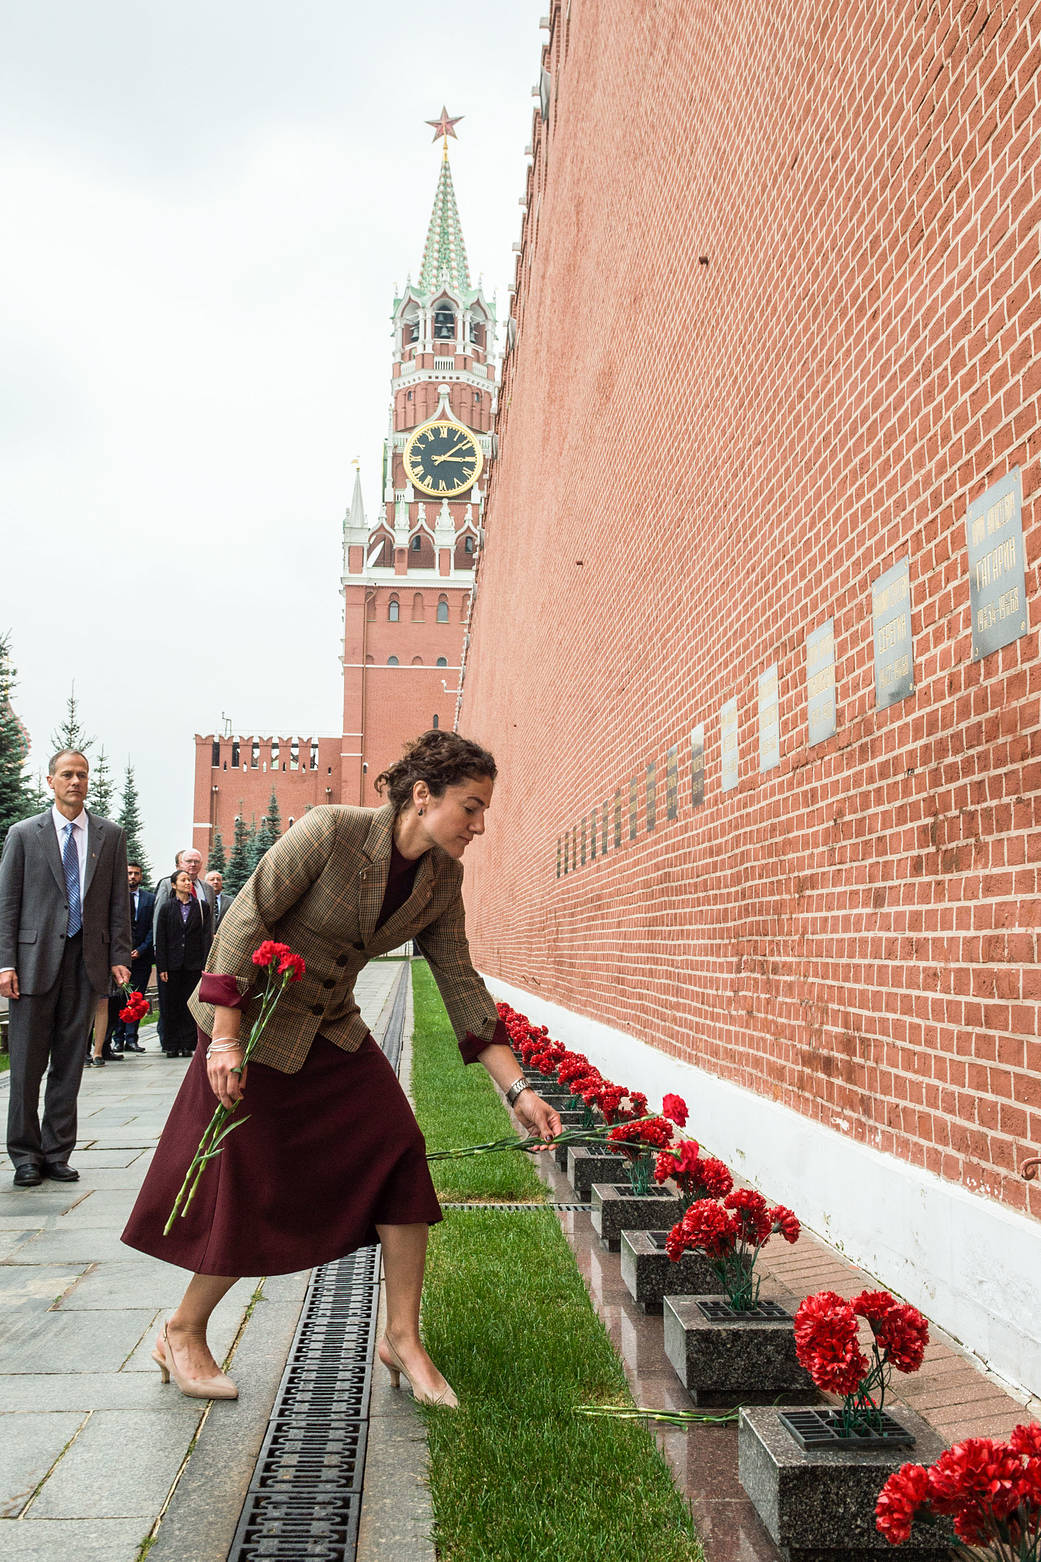 Expedition 61 crewmember Jessica Meir of NASA at the Kremlin Wall in Red Square in Moscow